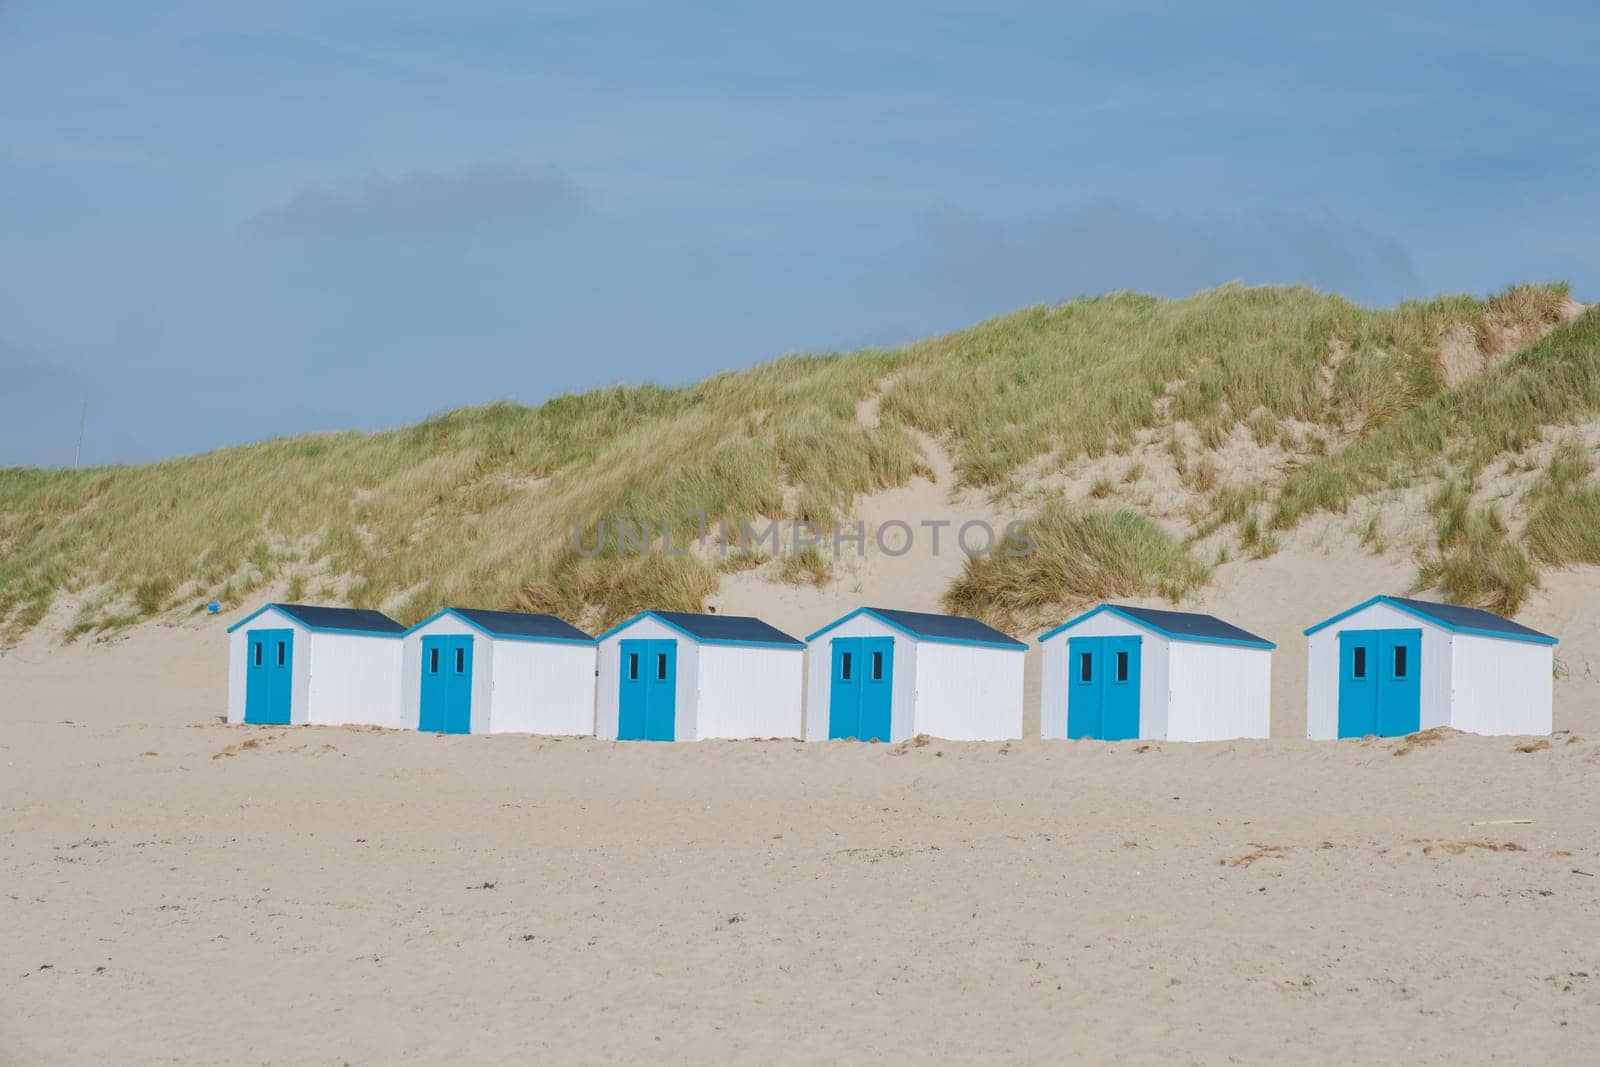 A colorful row of beach huts stands proudly on the sandy shores of Texel, Netherlands, under a clear blue sky. De Koog beach Texel